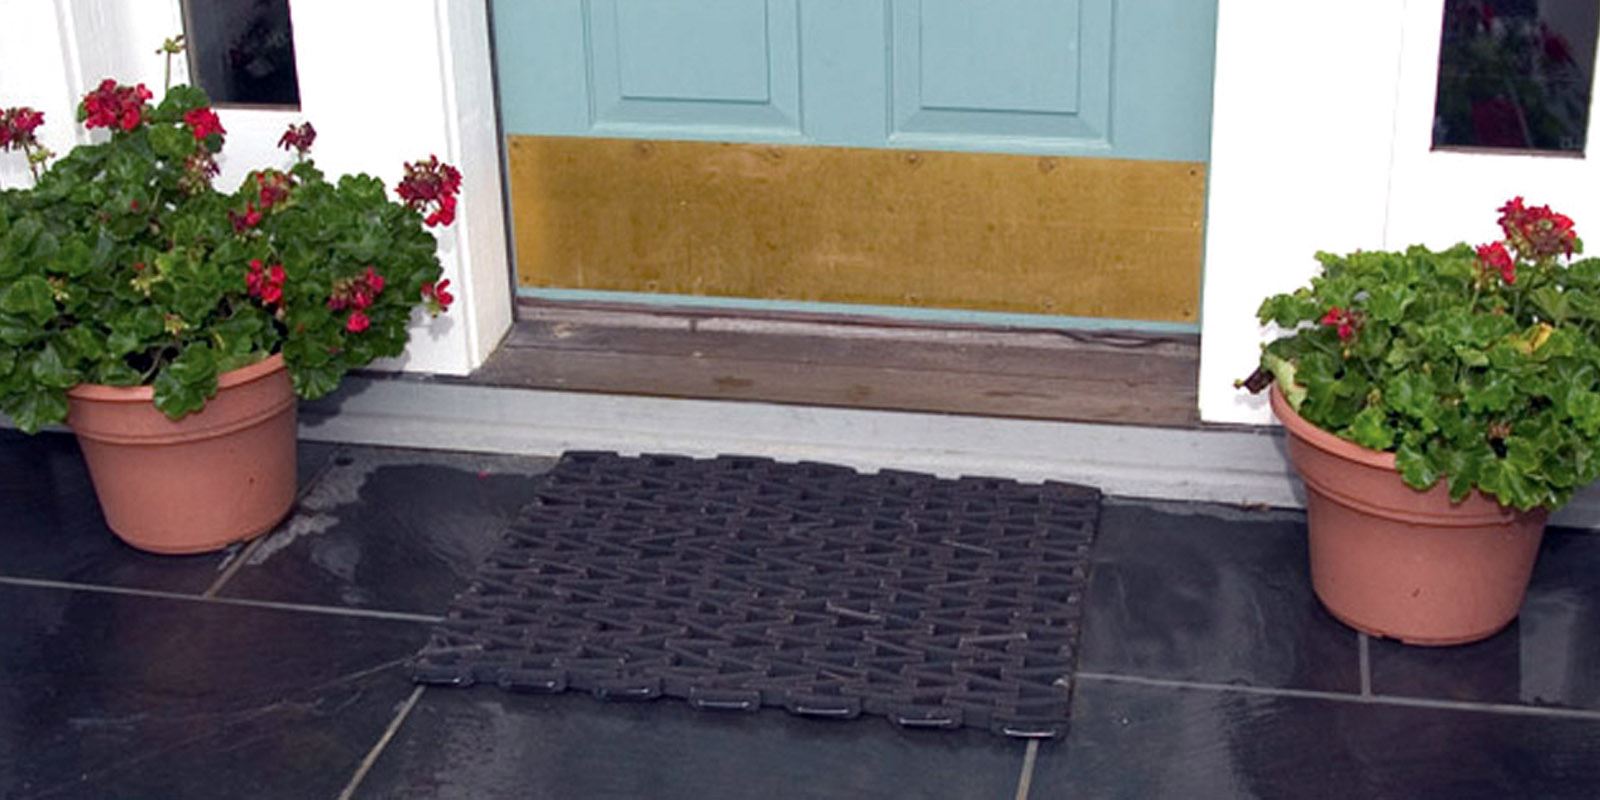 Heavy Duty Traffic Guard Doormat, Easy To Clean And Durable Rubber